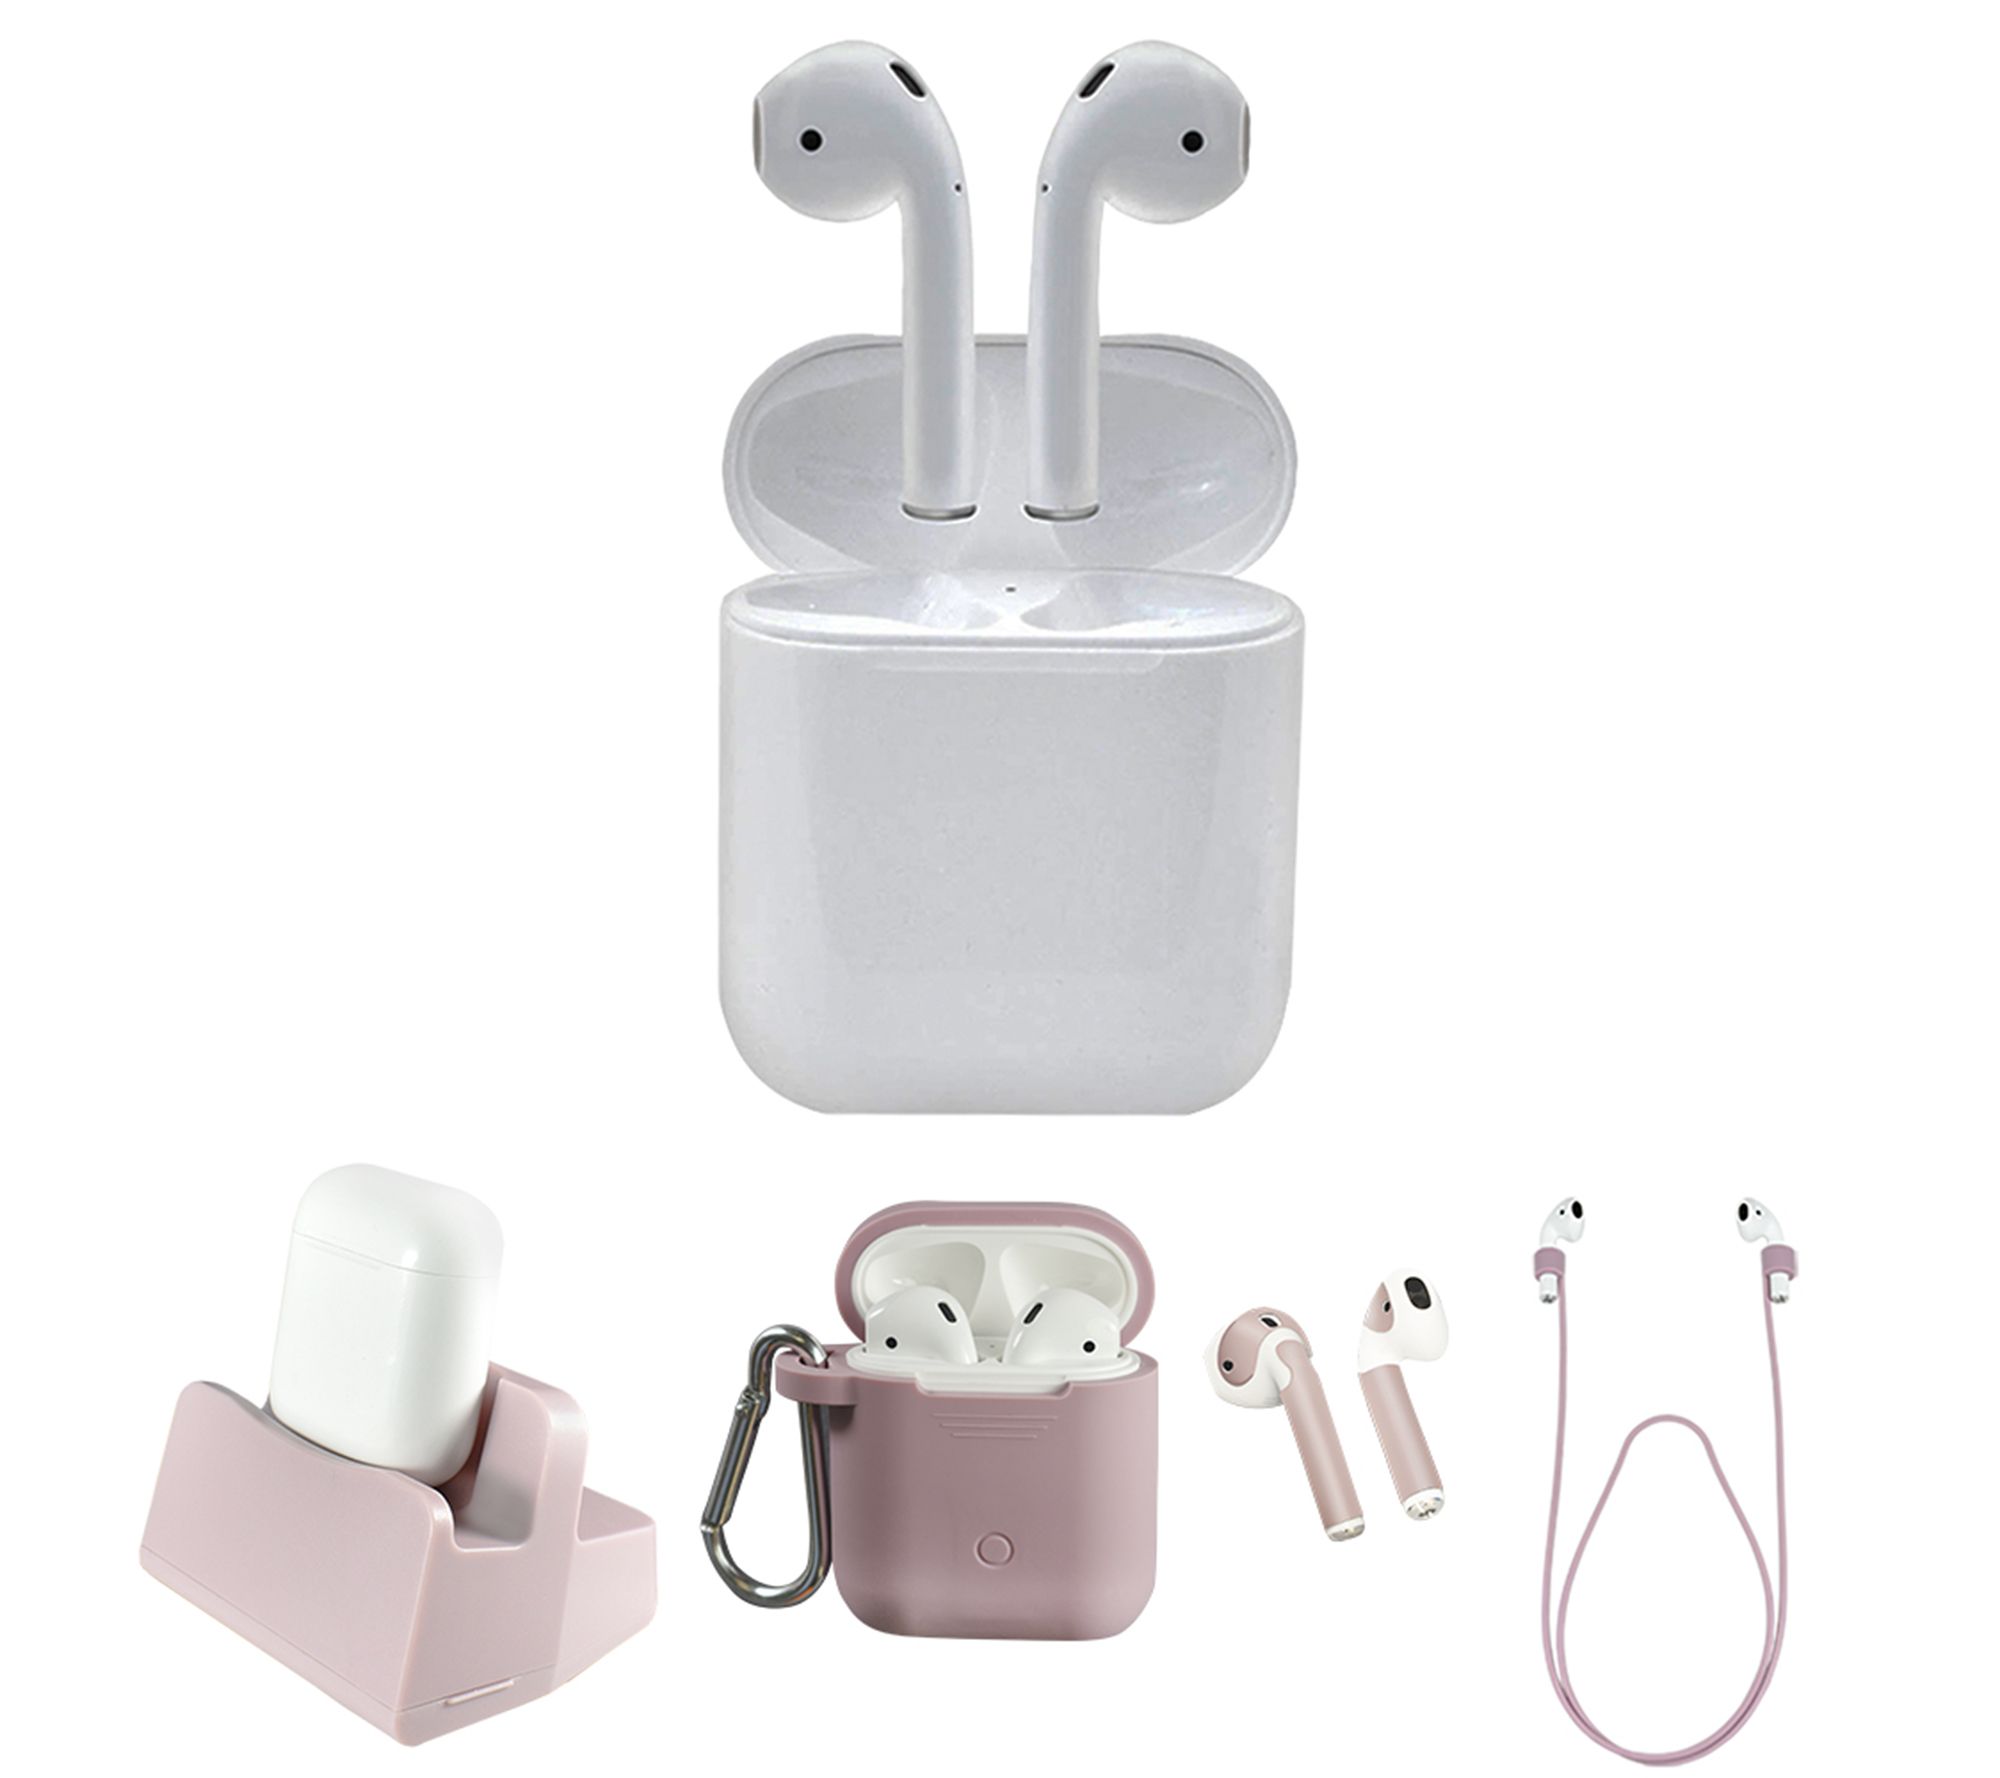 Apple AirPods 2nd Generation with Wired Charging Case & Accessories